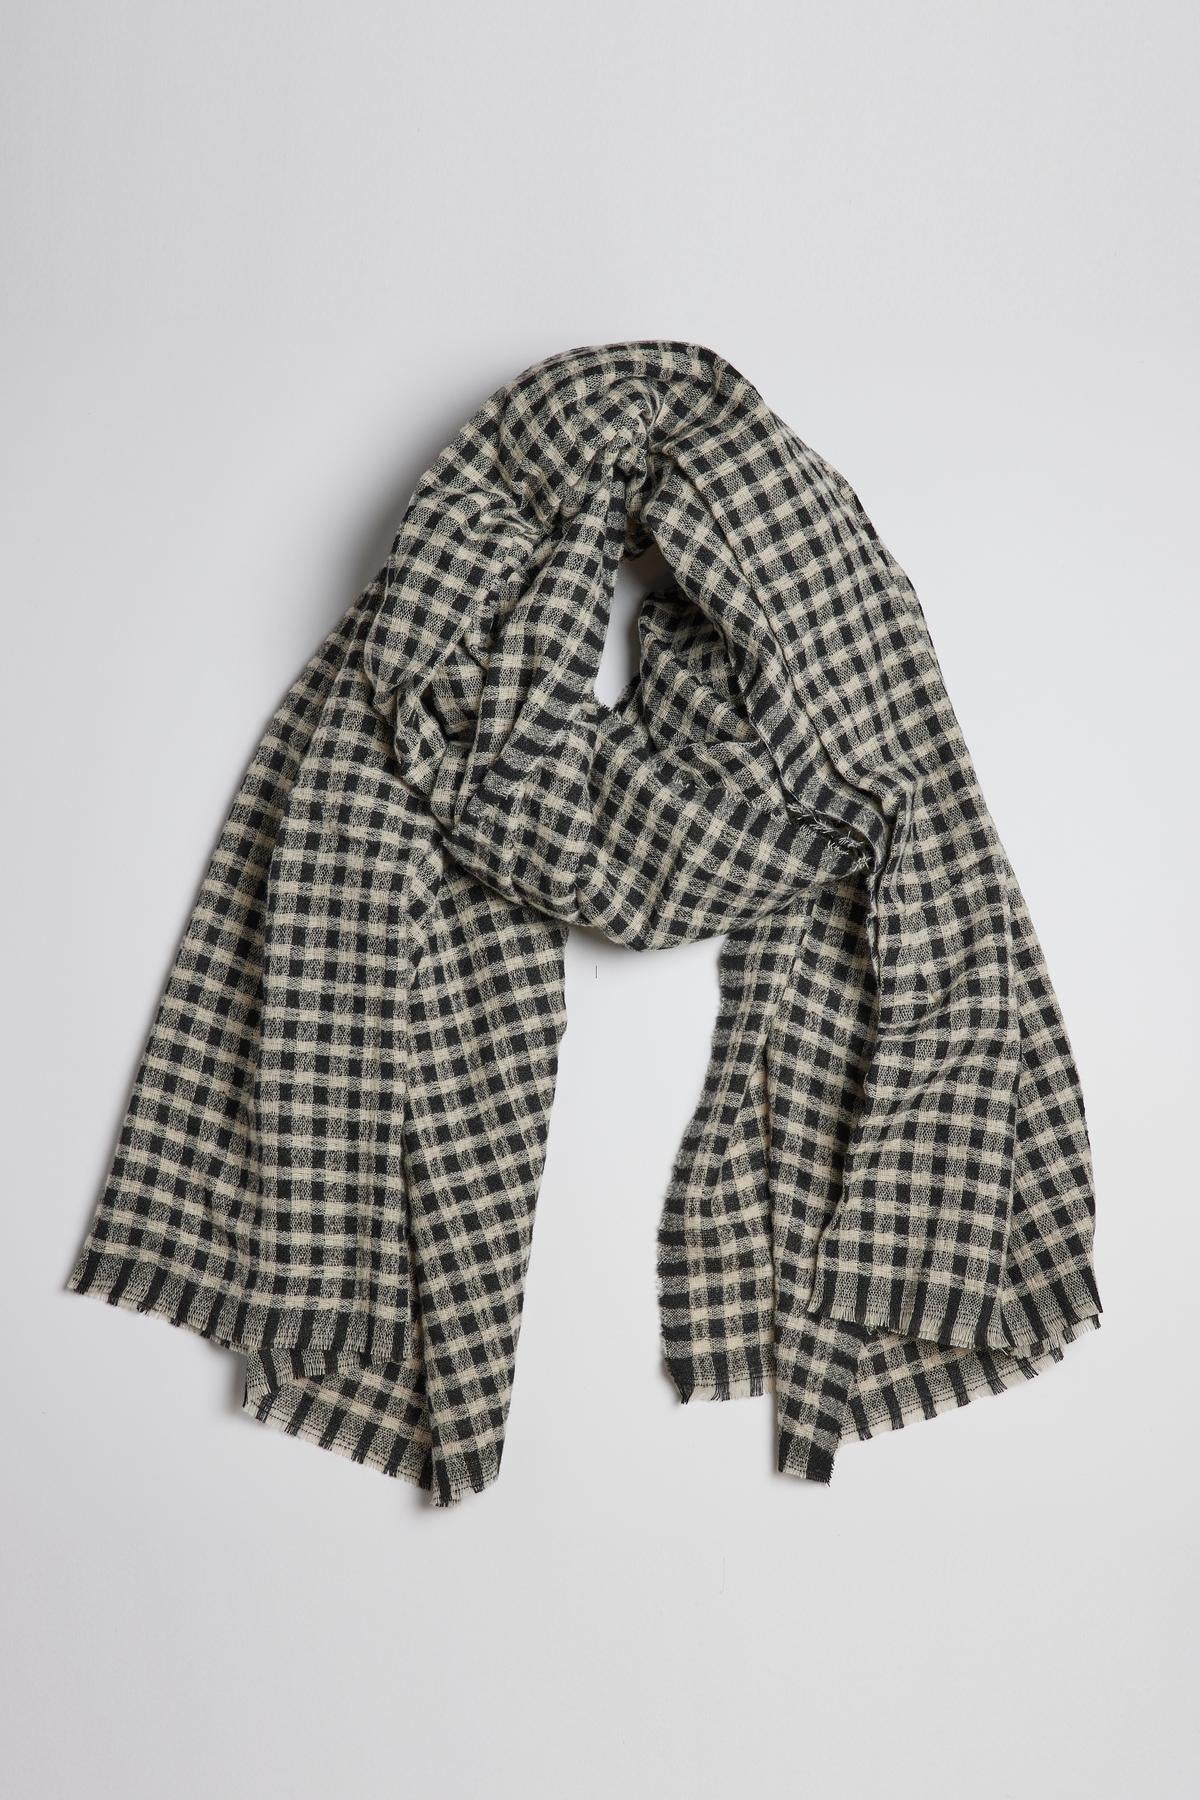 Bicolor Check Scarf in black and ivory-26749448028353